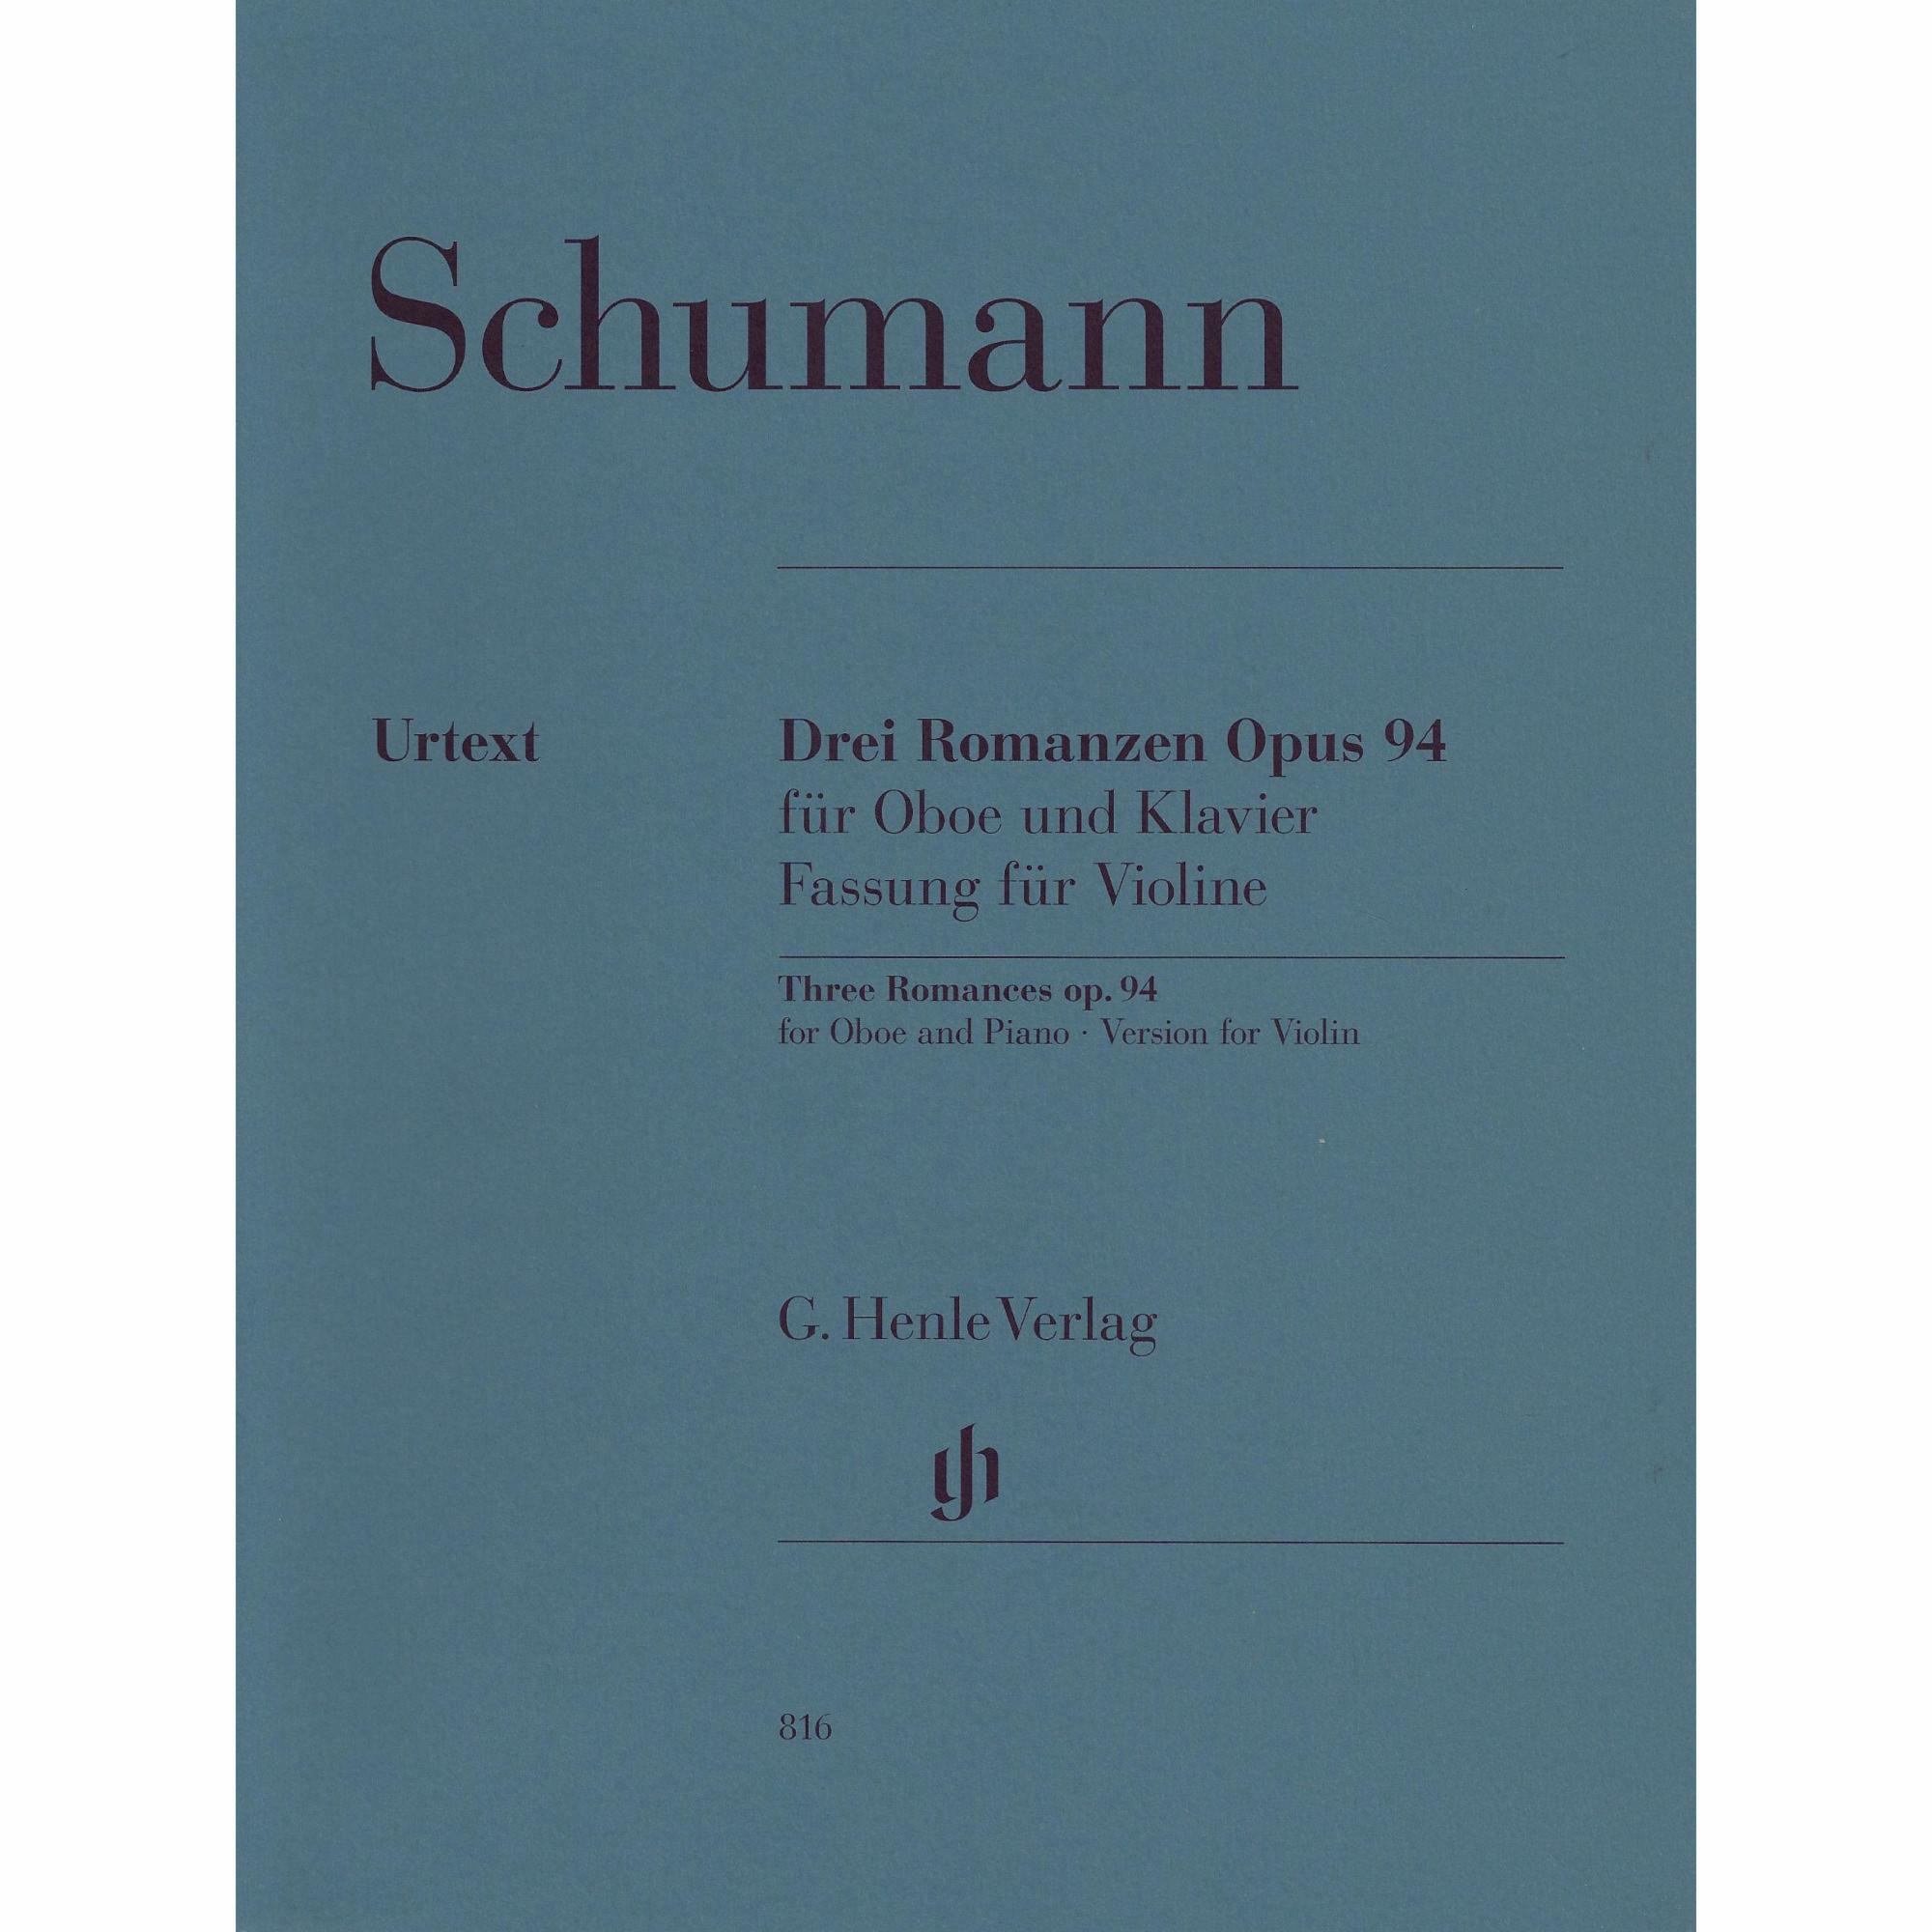 Schumann -- Three Romances, Op. 94 for Violin and Piano